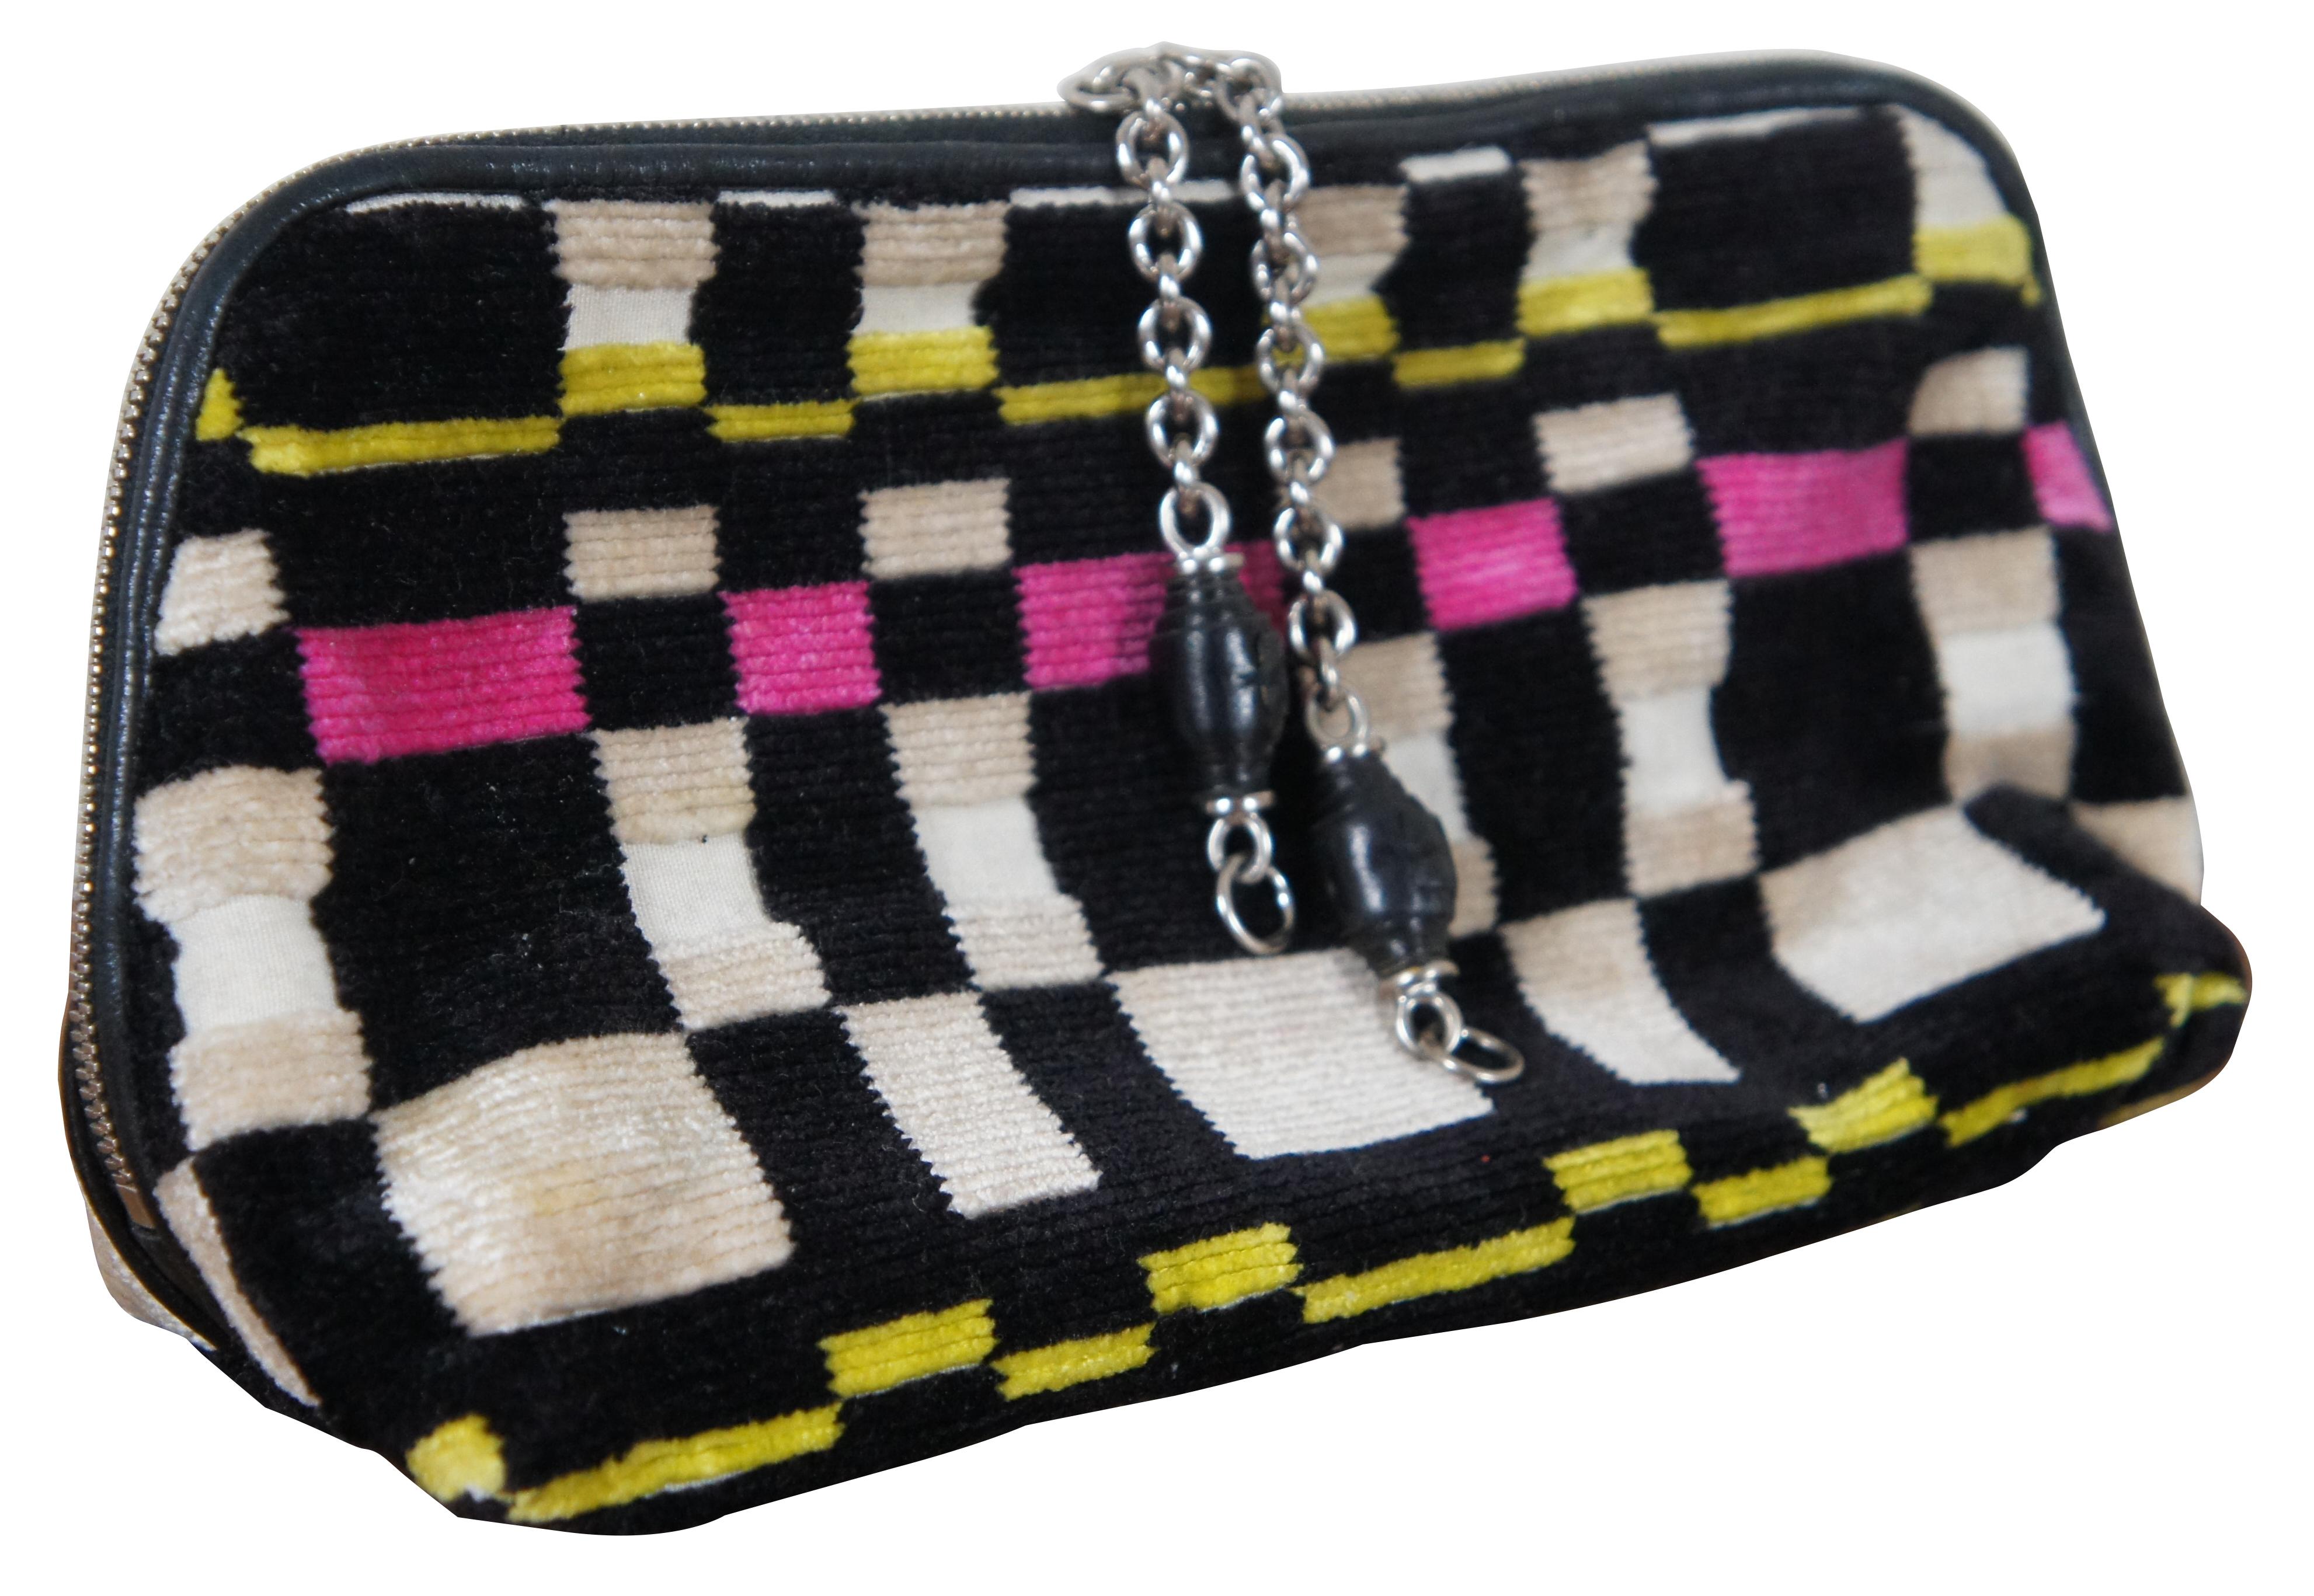 Vintage Bottega Veneta zippered cosmetic / toiletry / makeup / beauty bag or clutch, made in Italy. Features black, white, yellow and pink checkered corduroy velvet with leather trimming. Measures: 9